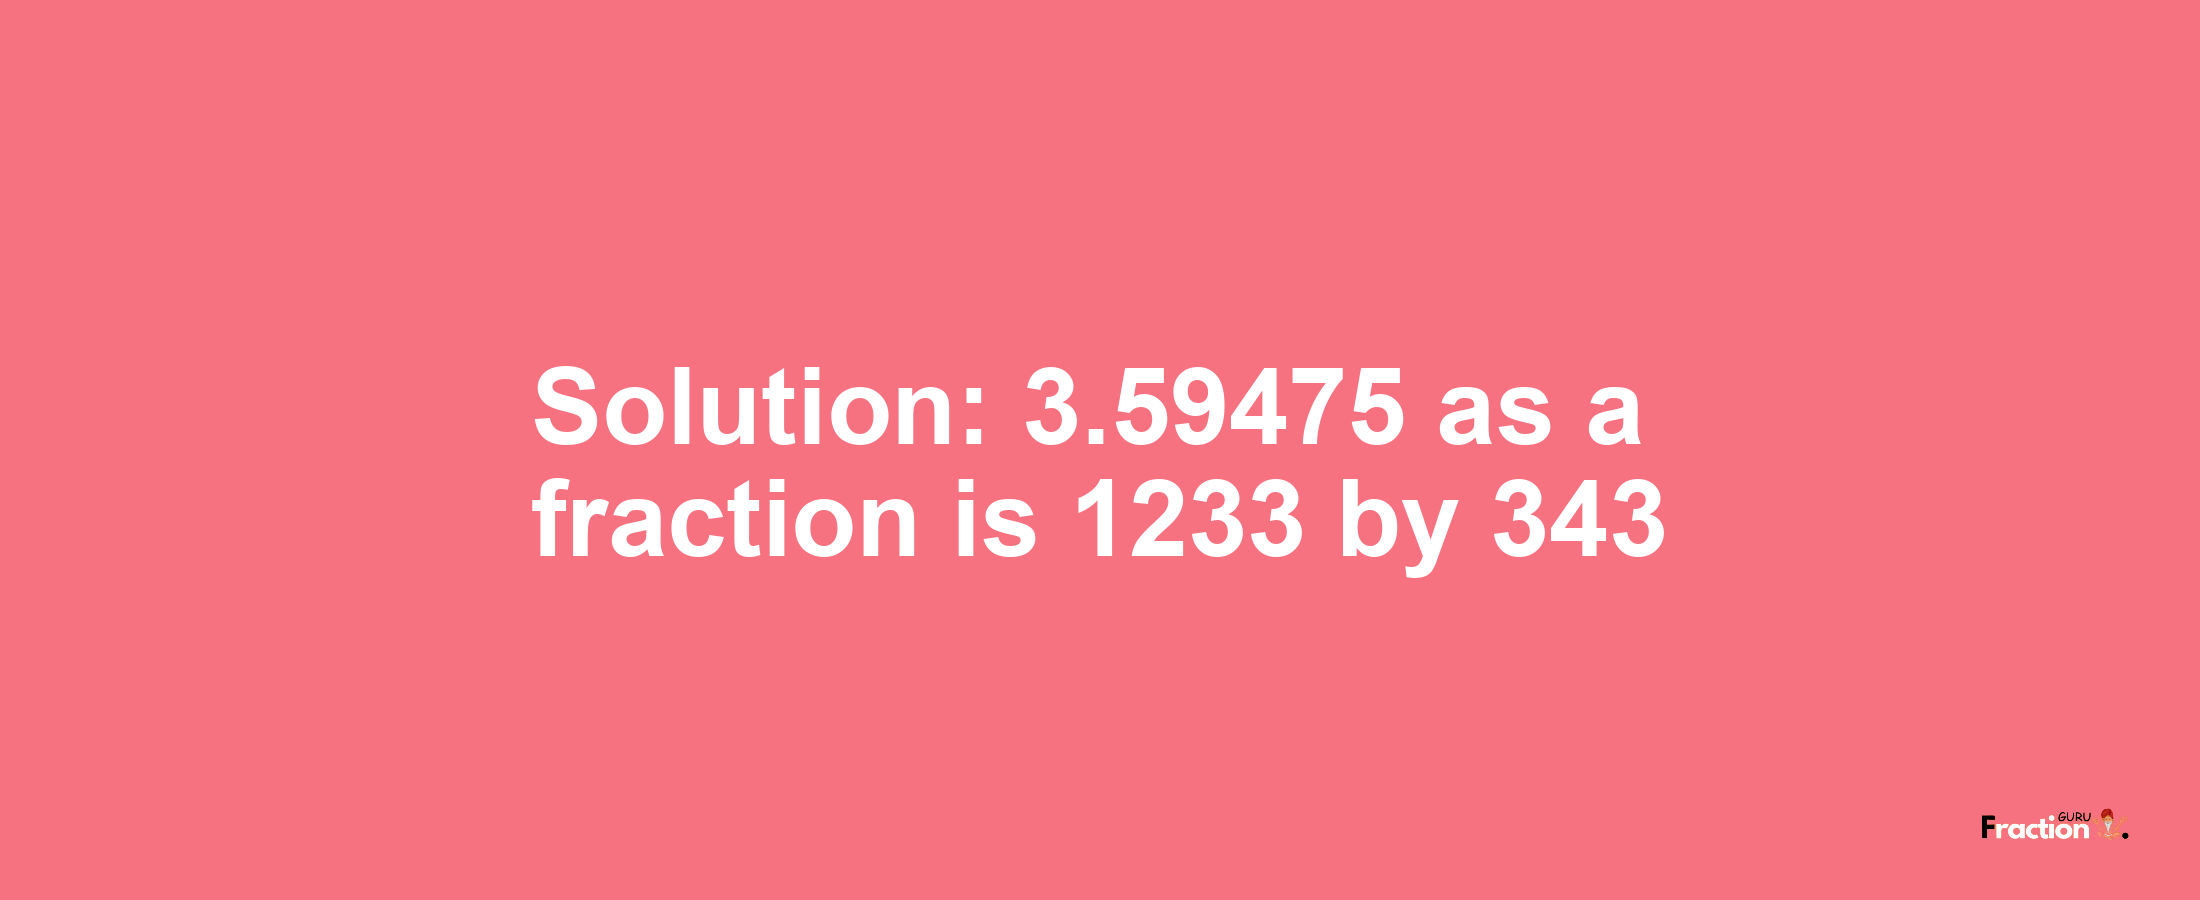 Solution:3.59475 as a fraction is 1233/343